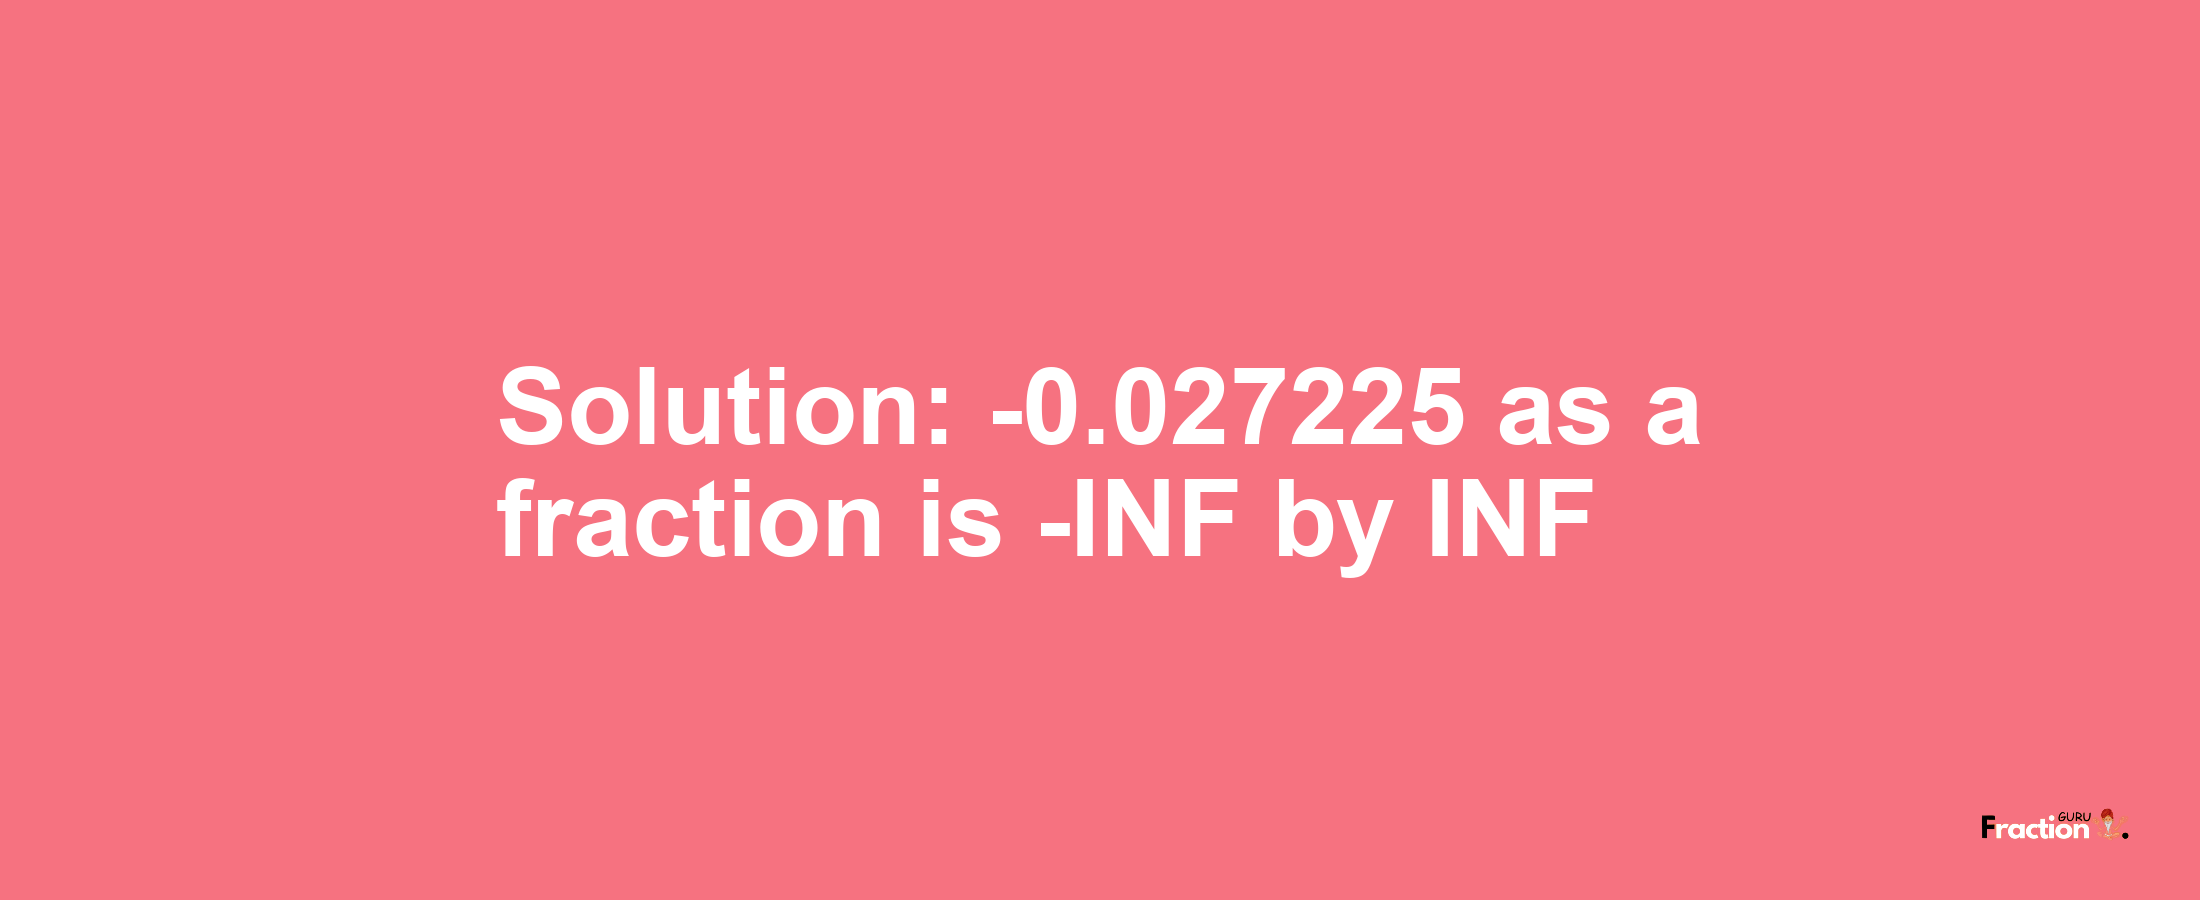 Solution:-0.027225 as a fraction is -INF/INF